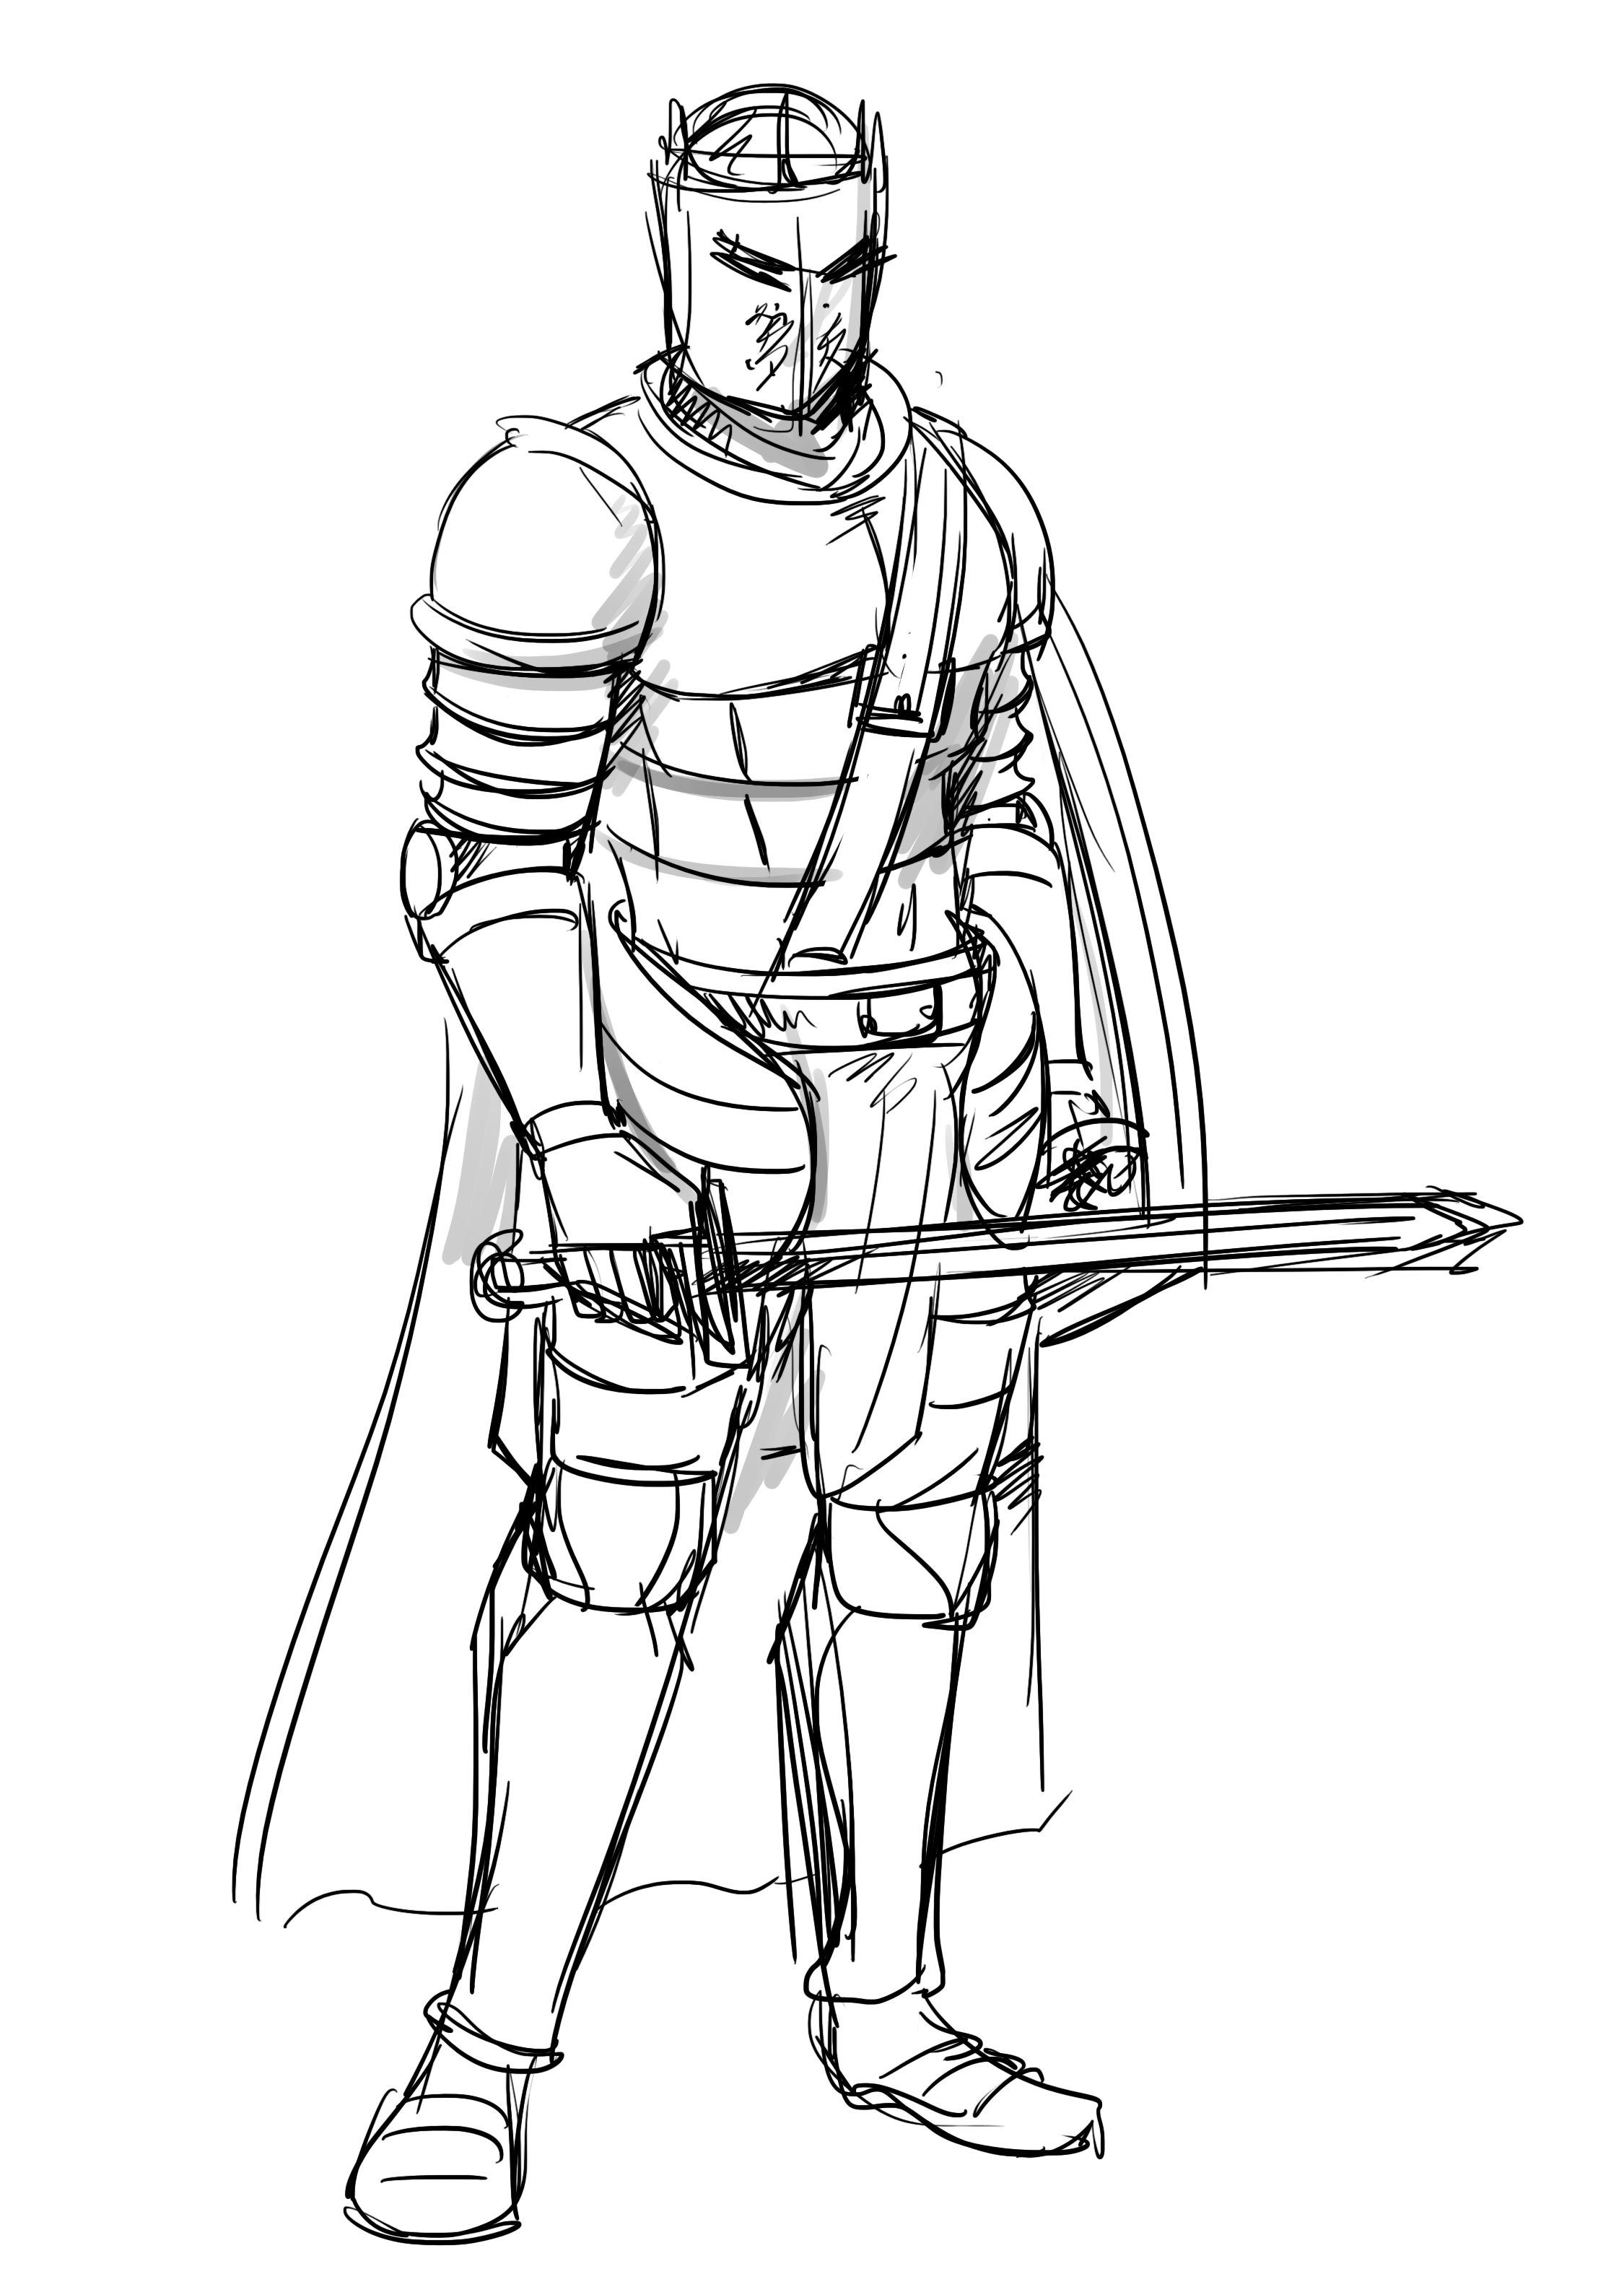 How to Draw a Knight : Step by Step Guide | How to Draw